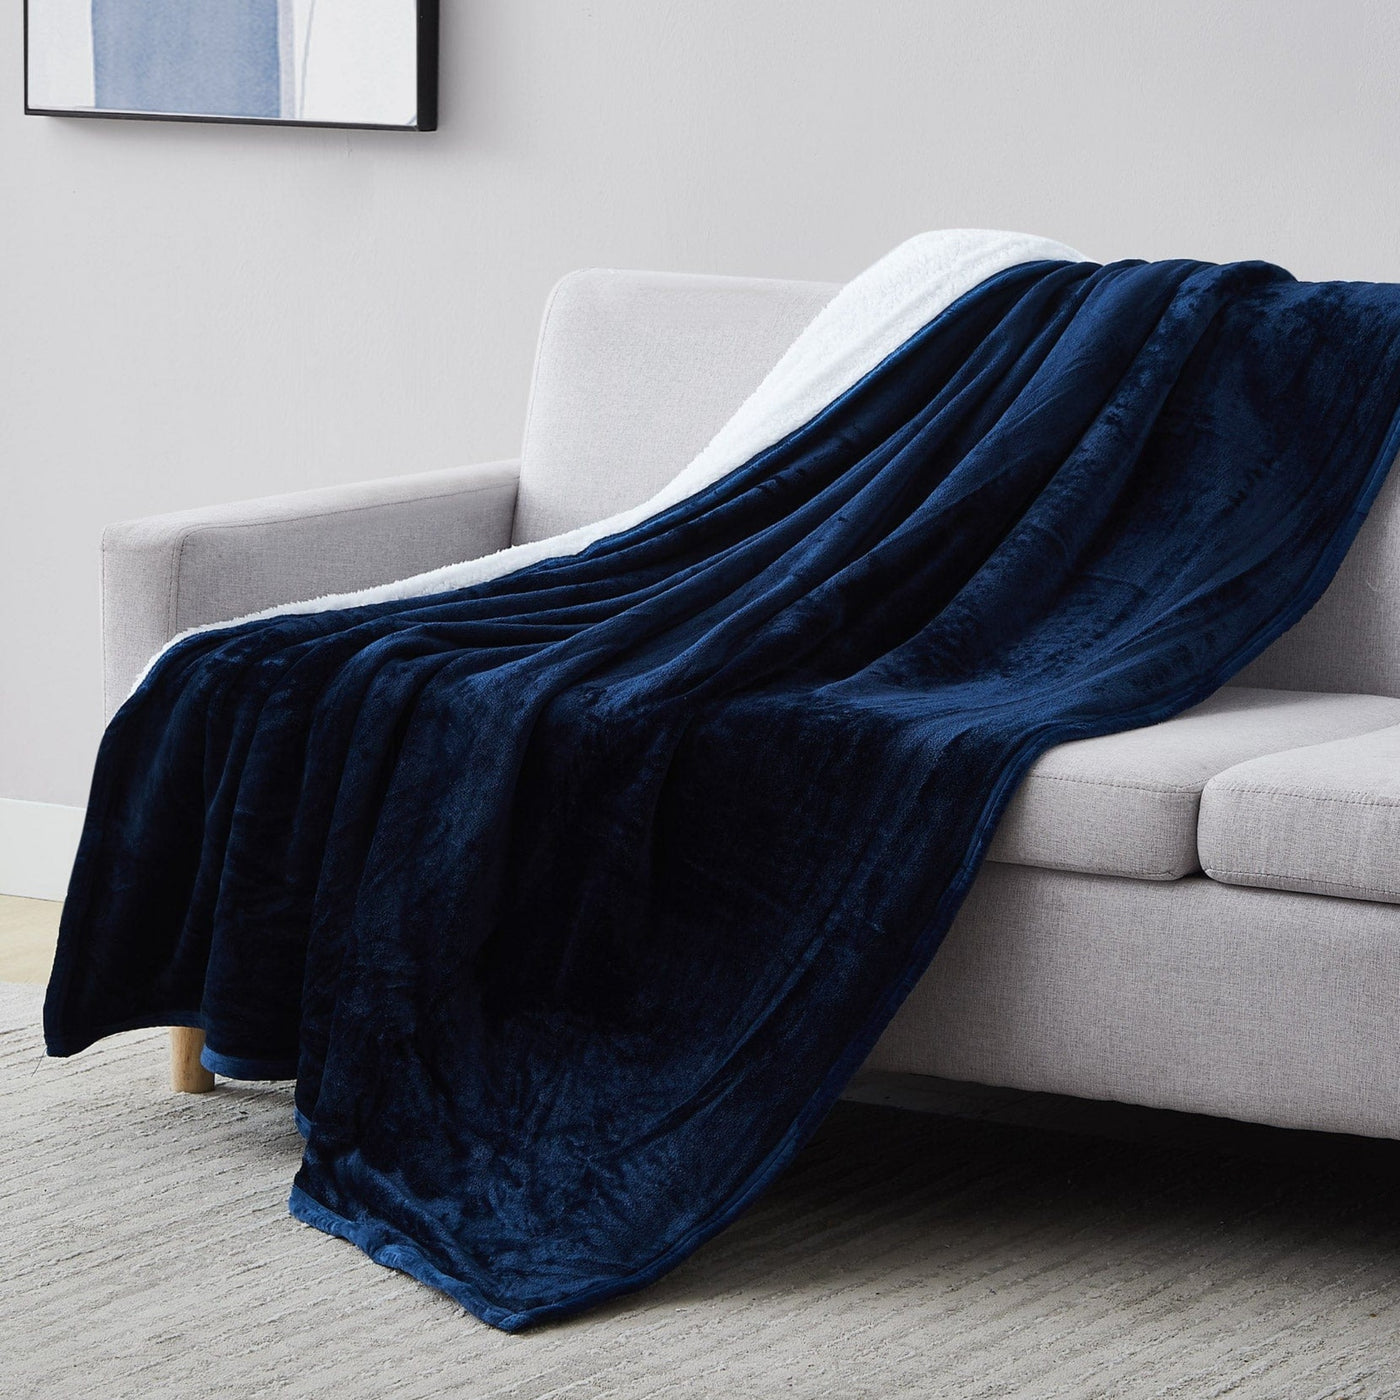 Sherpa-Fleece Oversized Reversible Blankets and Throws in Navy Blue on Sofa#color_microfleece-navy-blue